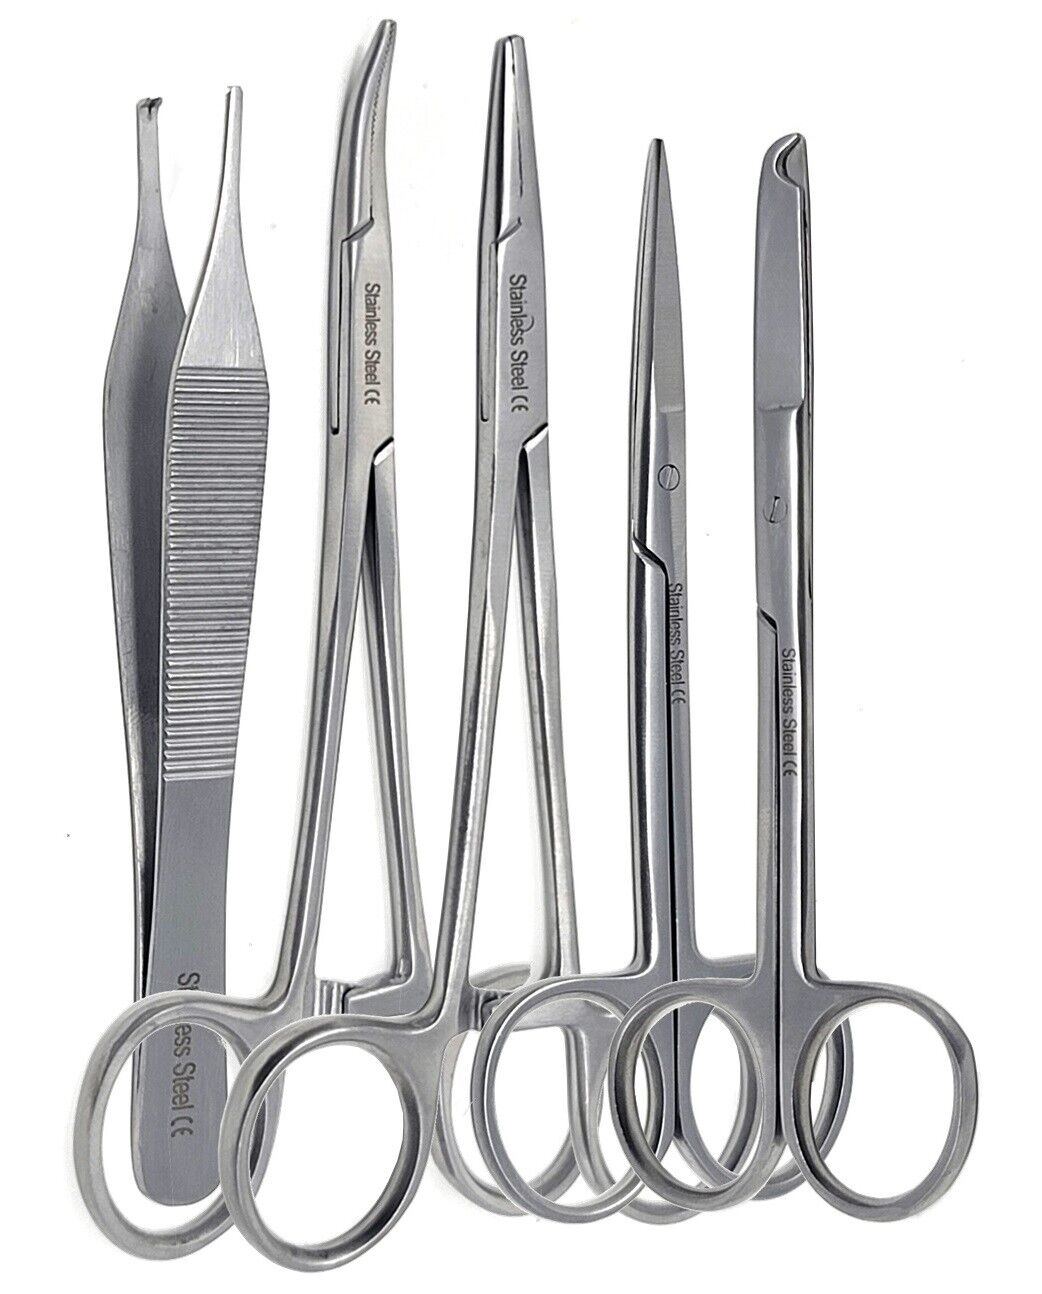 5 Pcs Suture Laceration Student Surgical Kit Stainless Steel CE Instruments A2Z SCILAB Does Not Apply